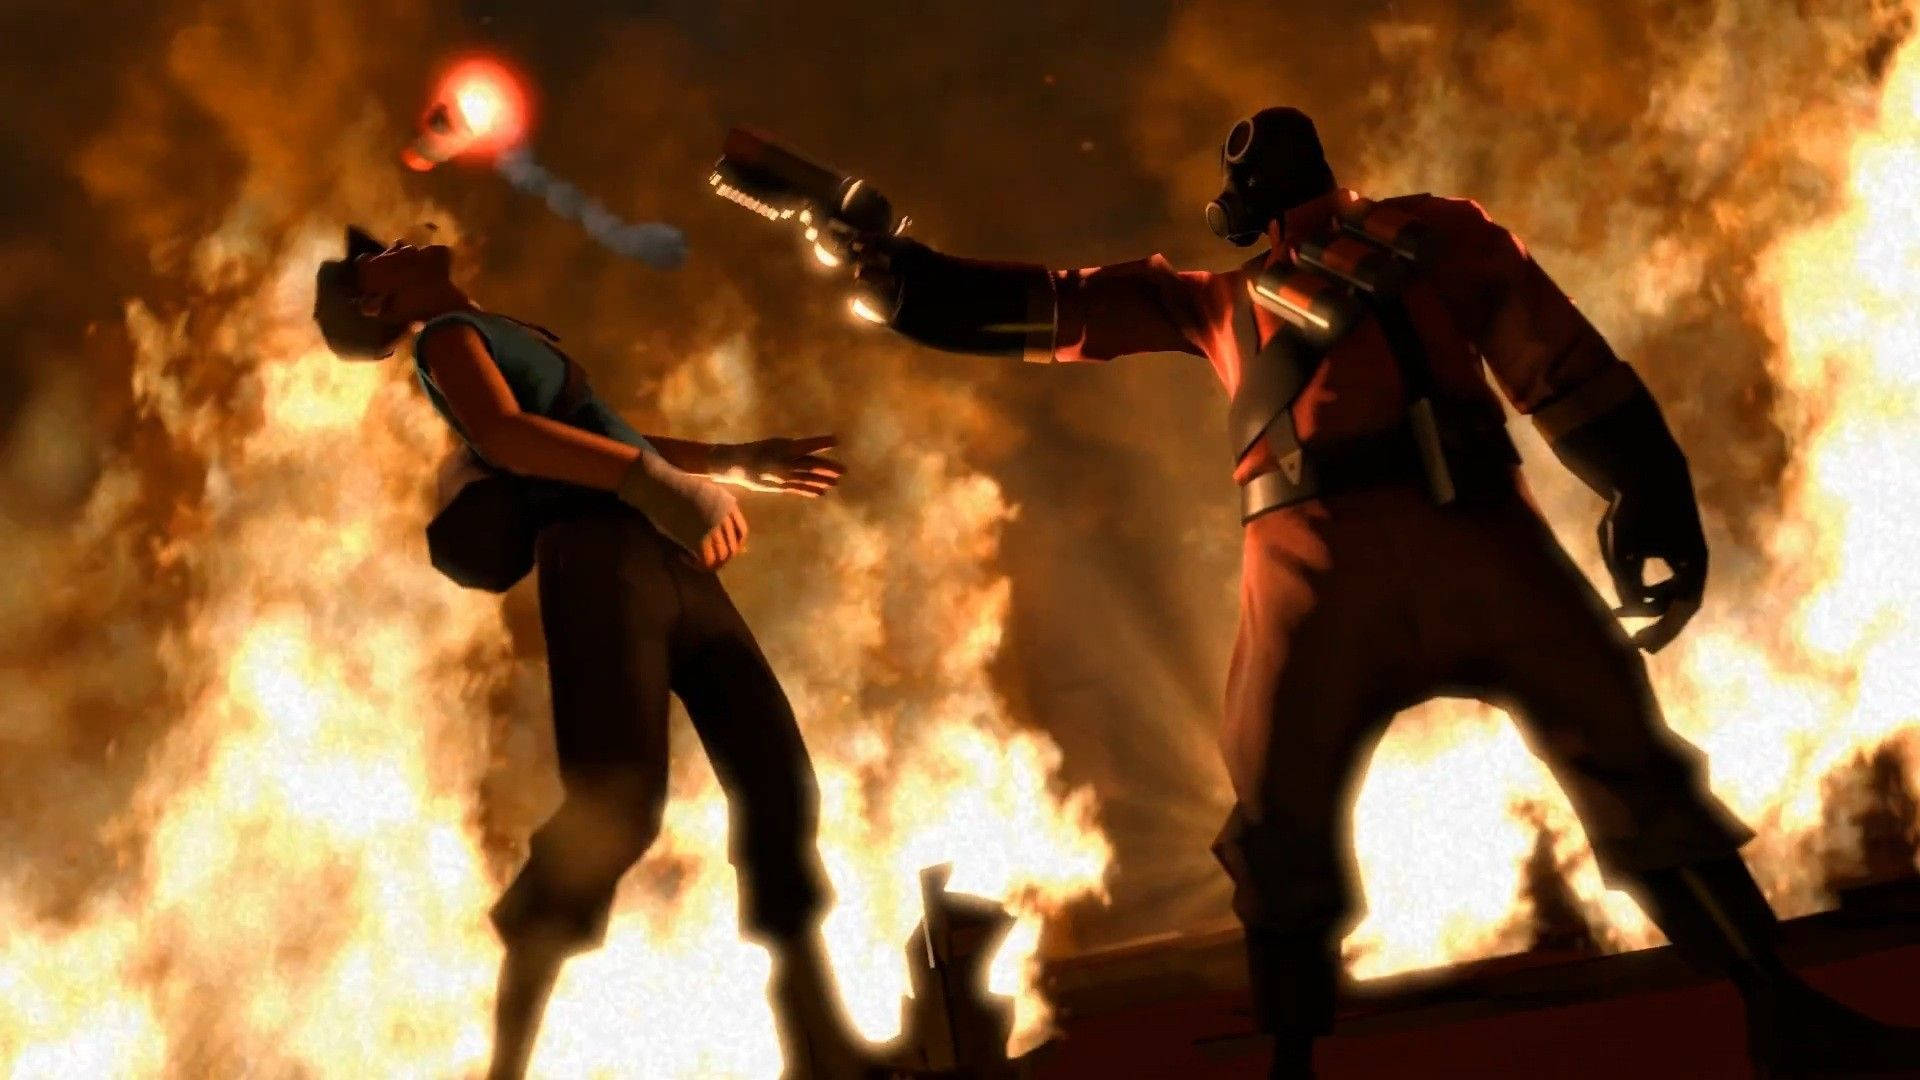 Epic Battle Scene between Pyro and Scout - Team Fortress 2 Wallpaper